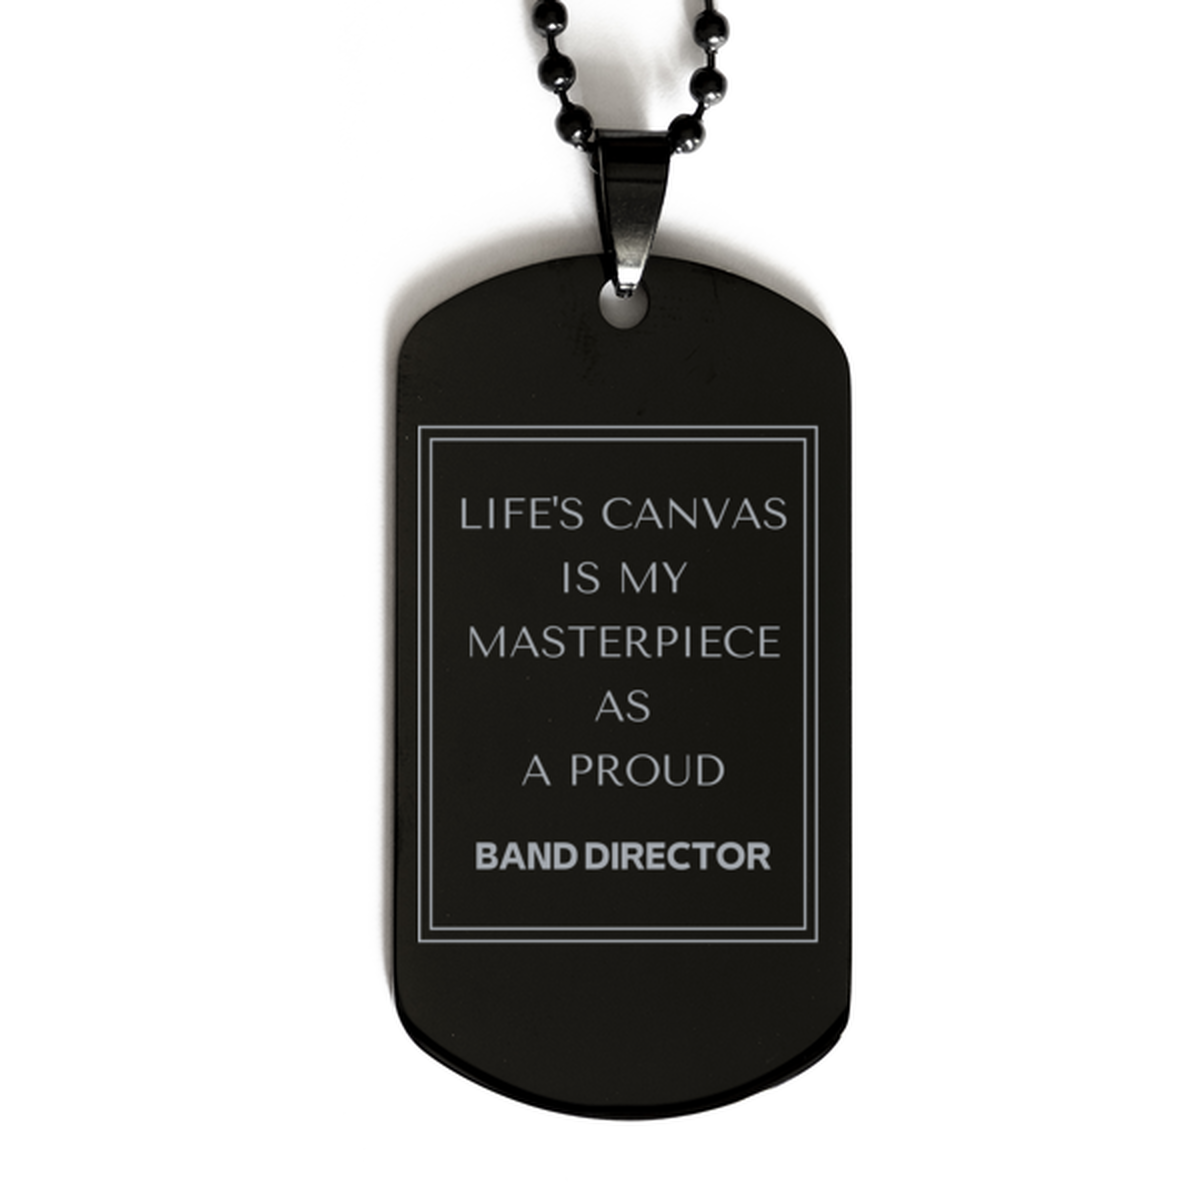 Proud Band Director Gifts, Life's canvas is my masterpiece, Epic Birthday Christmas Unique Black Dog Tag For Band Director, Coworkers, Men, Women, Friends